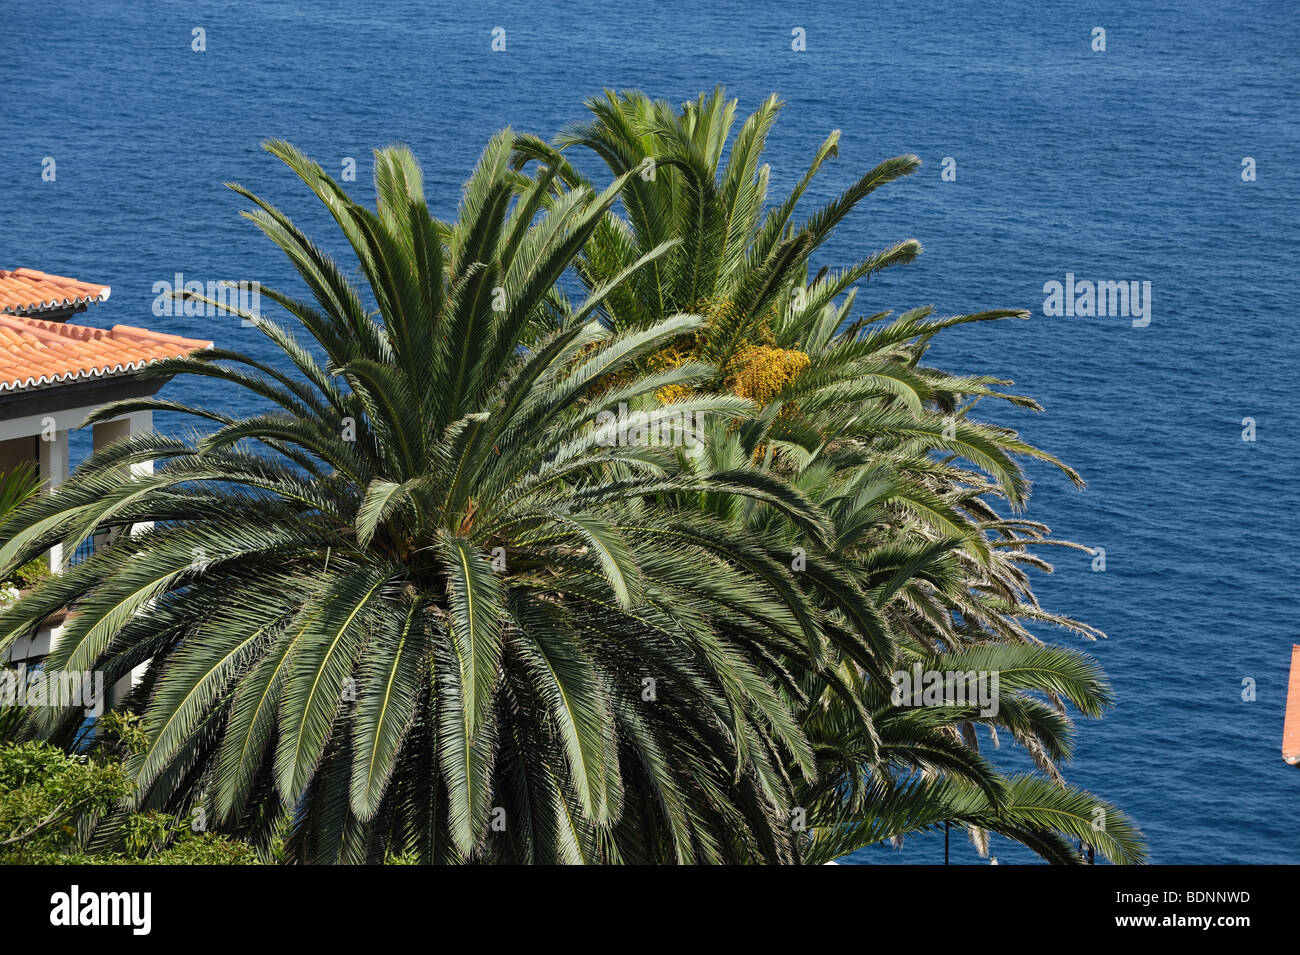 Ornamental palm trees in early fruit set against a blue Atlantic sea, Funchal, Madeira Stock Photo